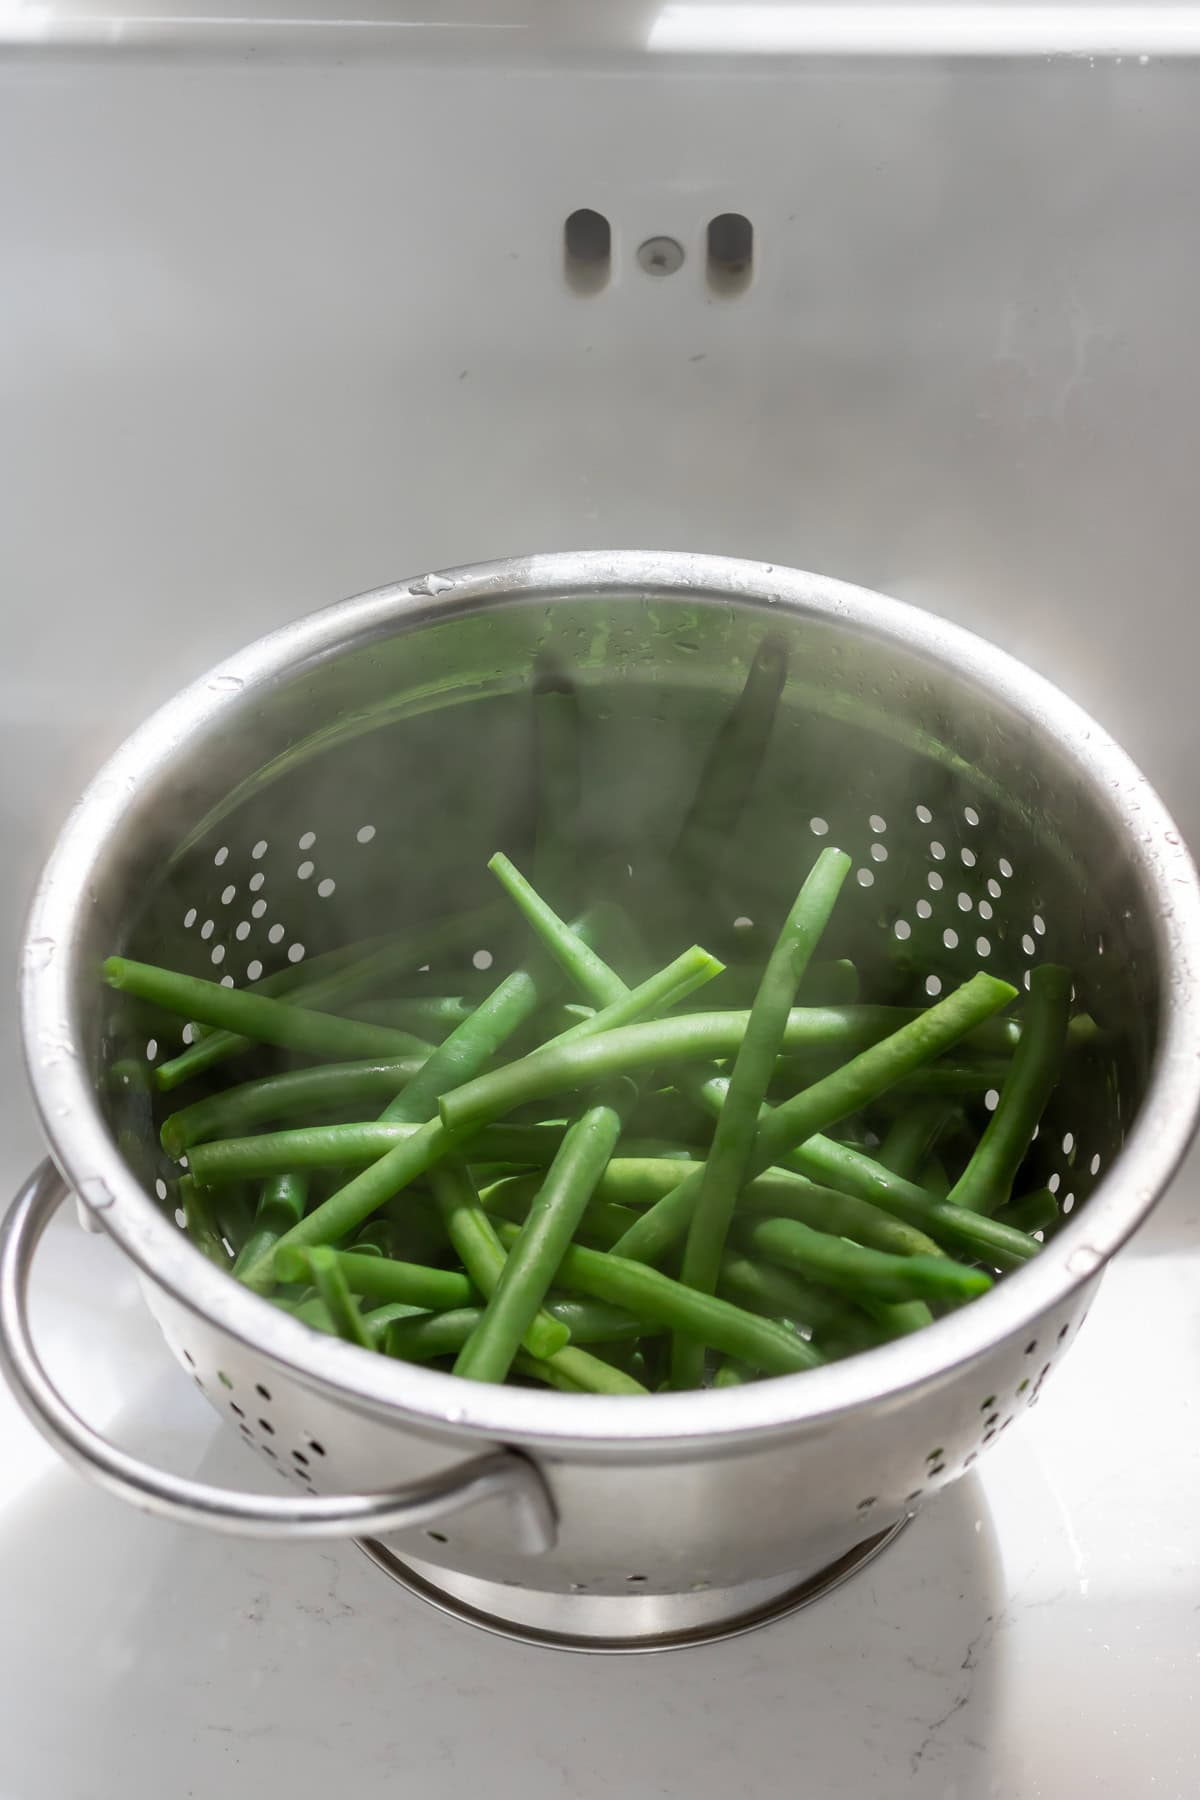 Draining green beans in a colander in the sink.